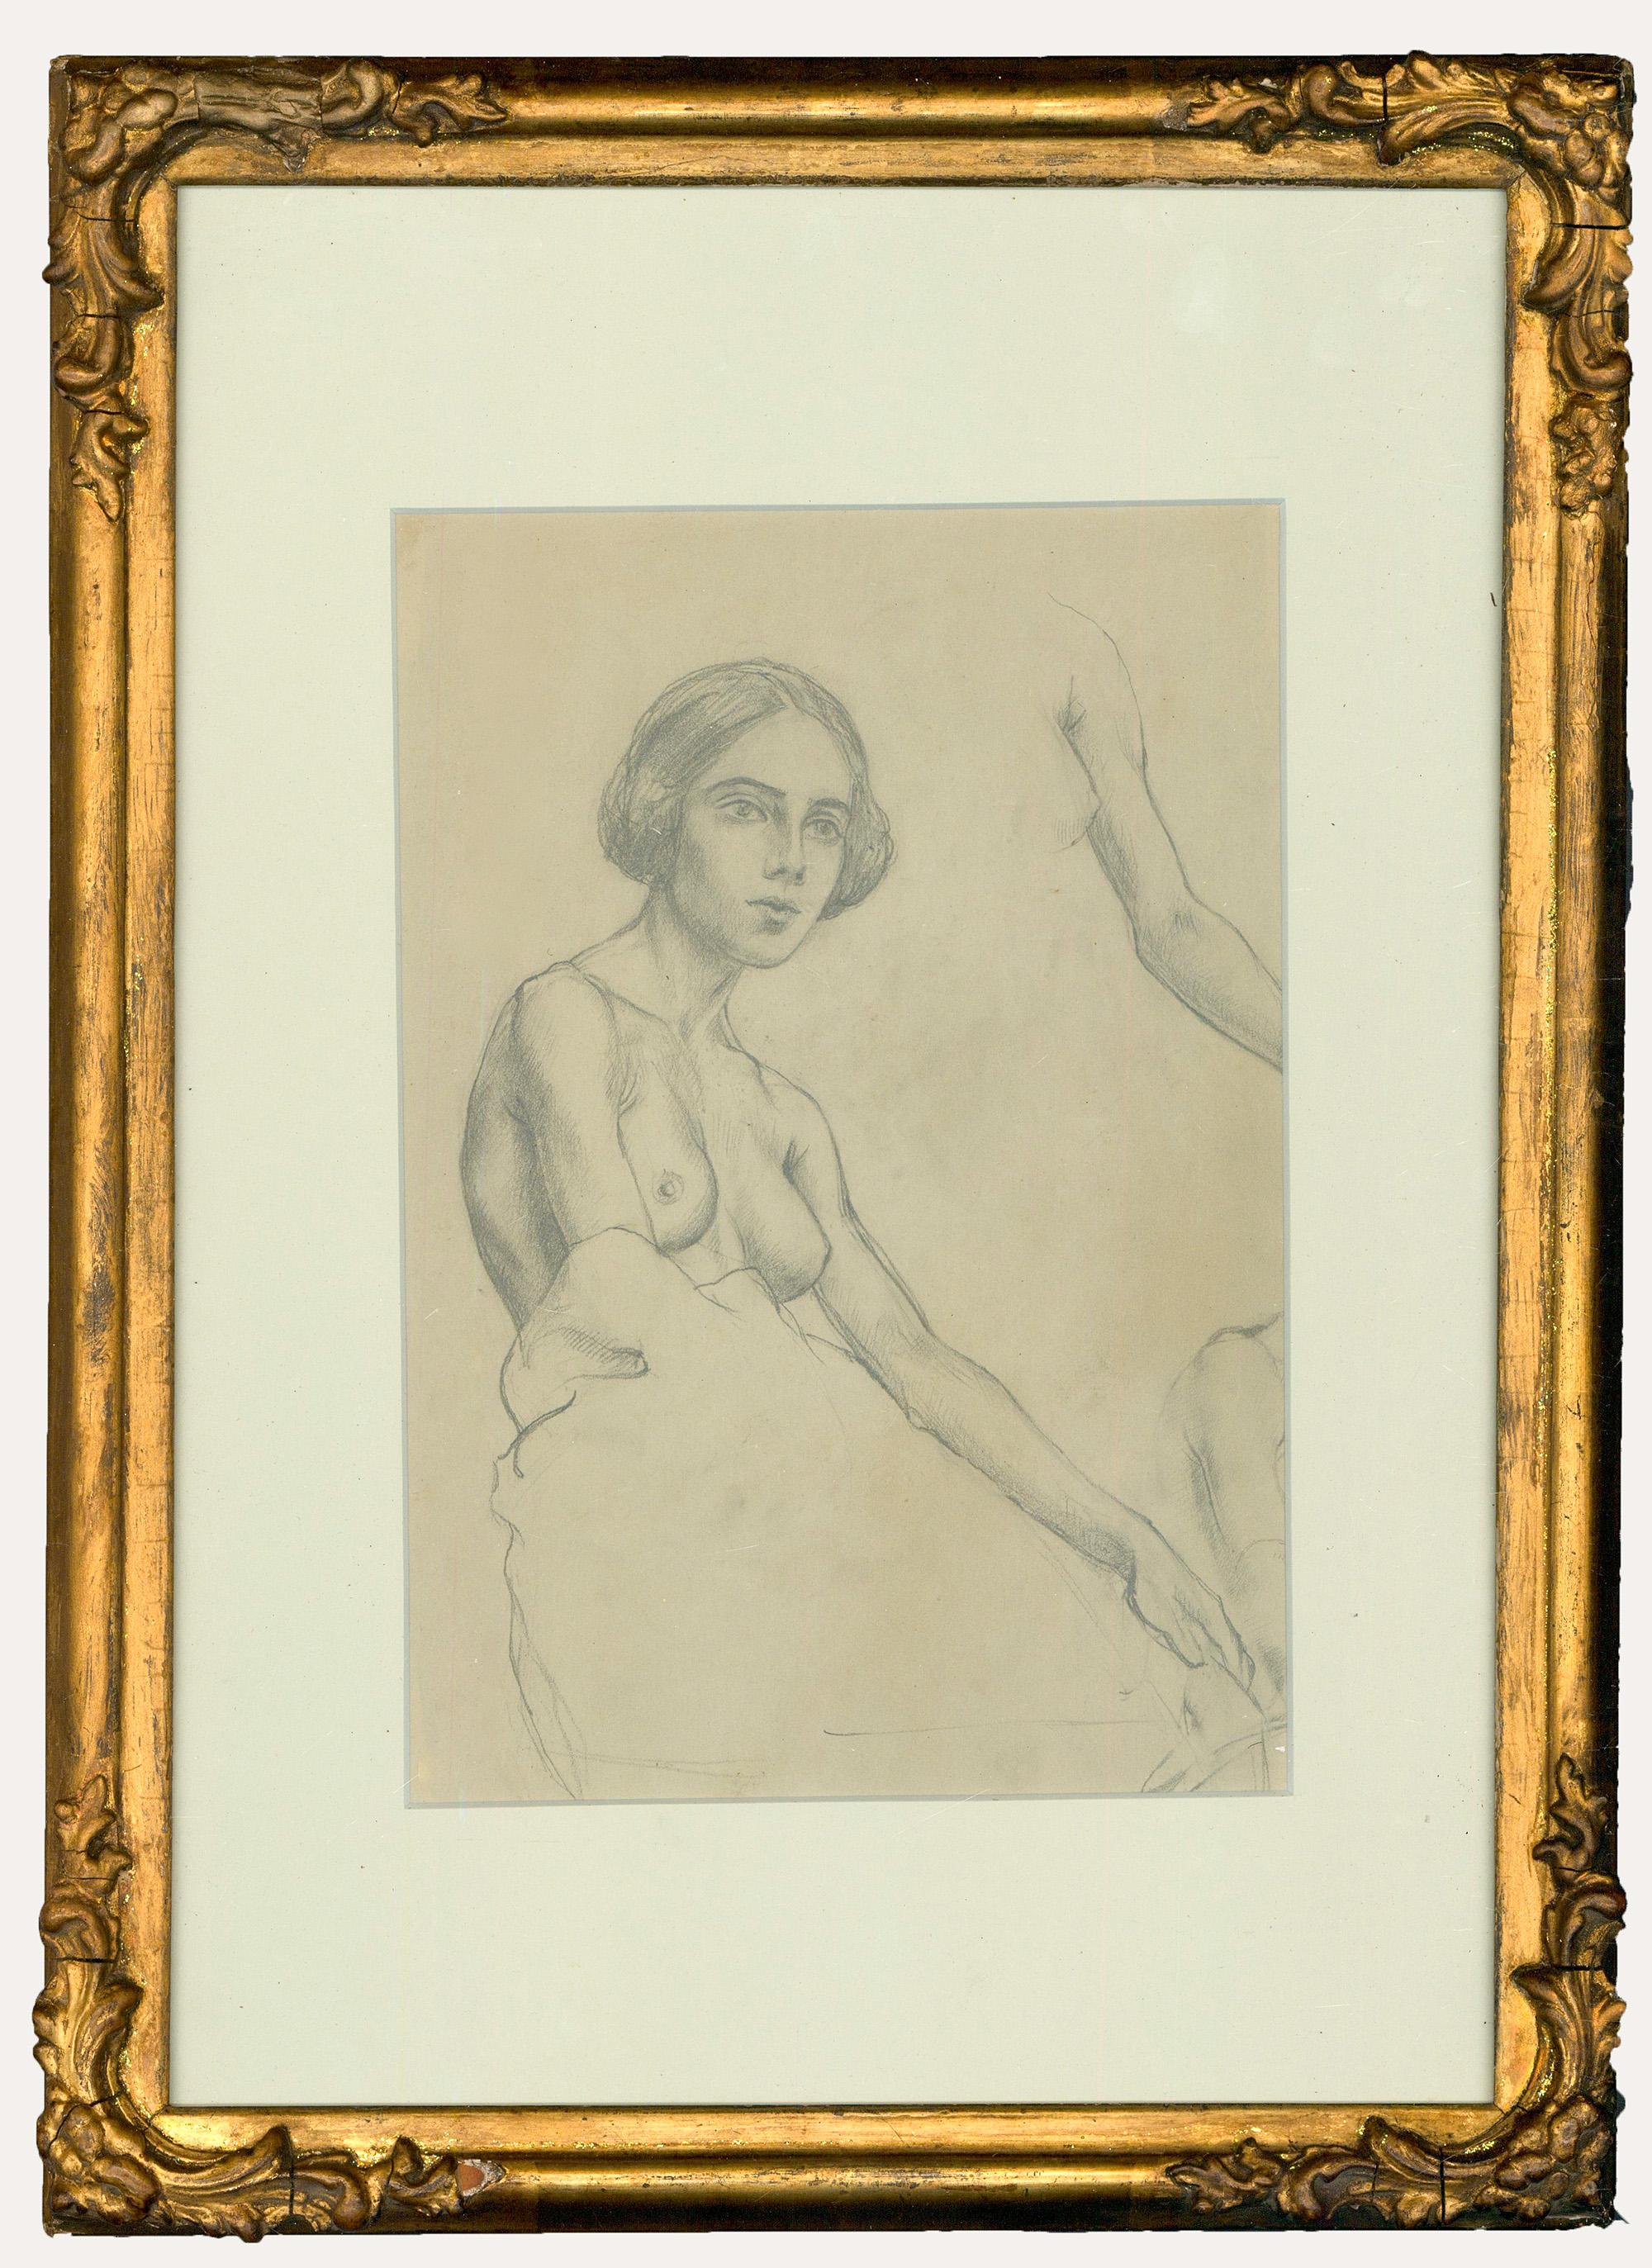 A fine life drawing depicting a seated woman partially covered with material. The artist captures the model in a delicate hand showing primary sketches in preparation to the upper right. Presented in a gilt frame with foliate corner mouldings. On